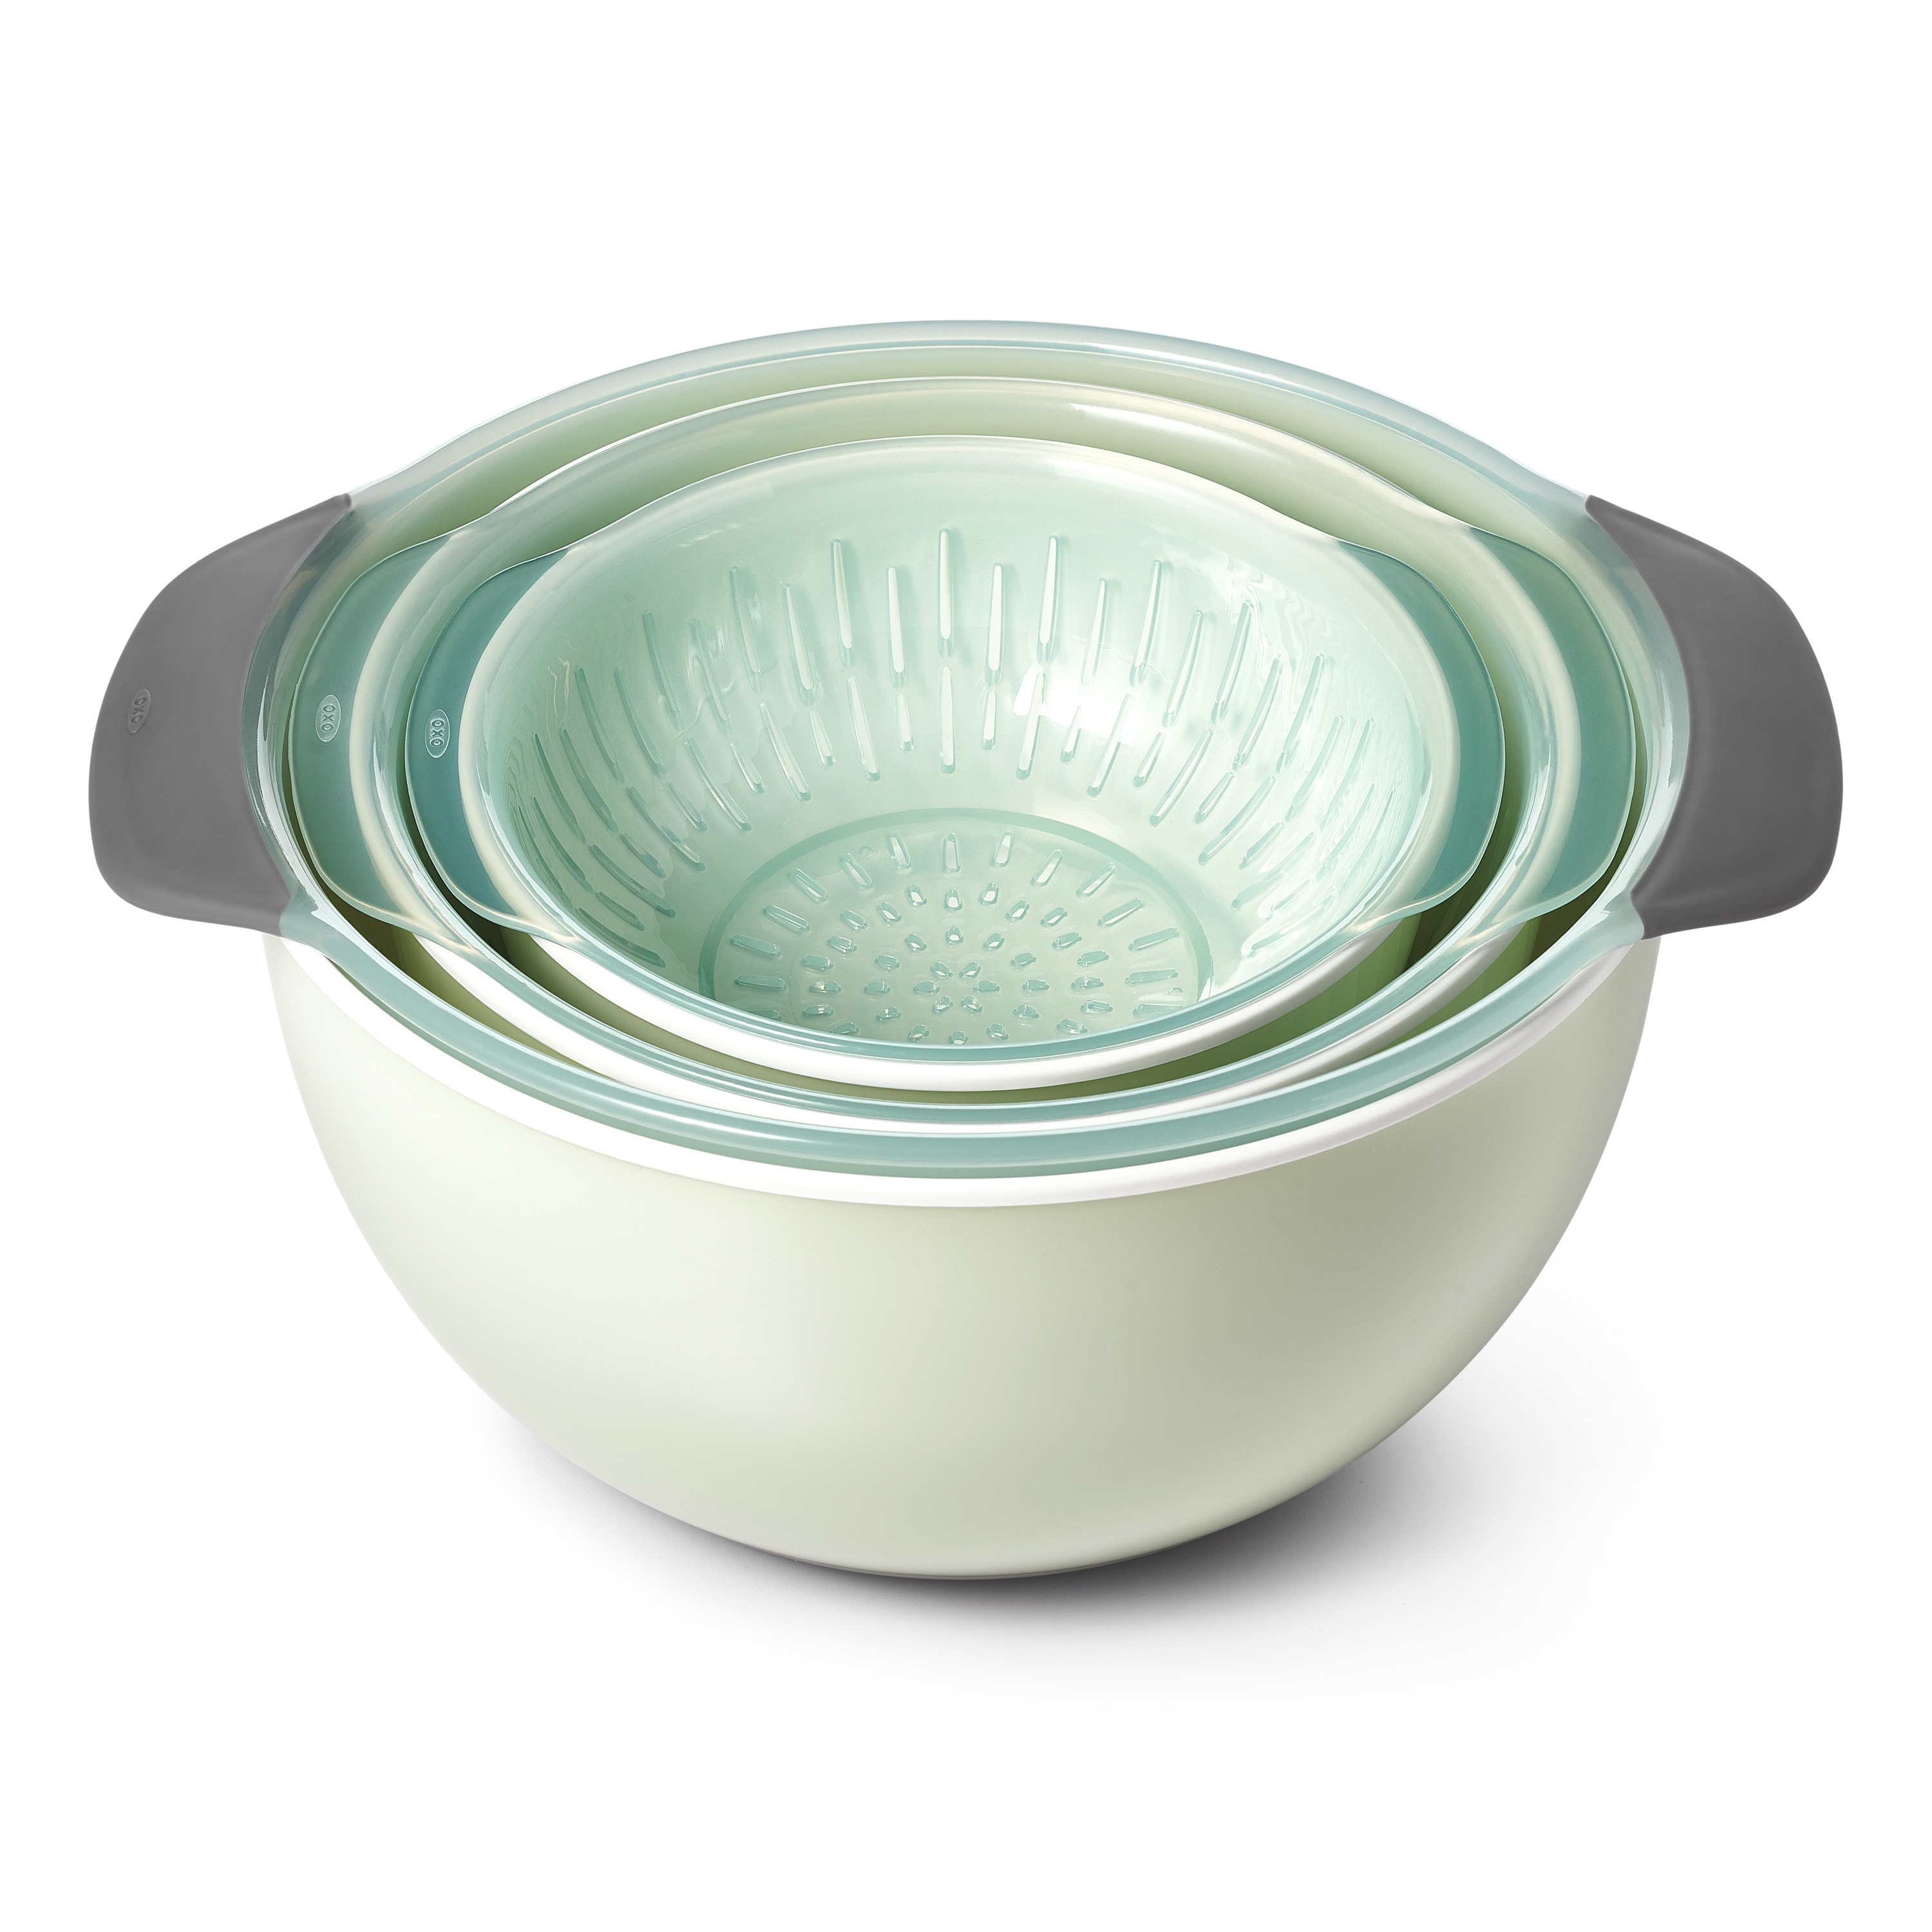 https://ak1.ostkcdn.com/images/products/is/images/direct/3ac8265015a0edf4c9be8c80469e42727cfa2eaa/OXO-Good-Grips-9-Piece-Nesting-Bowls-%26-Colanders-Set---Sea-Glass.jpg